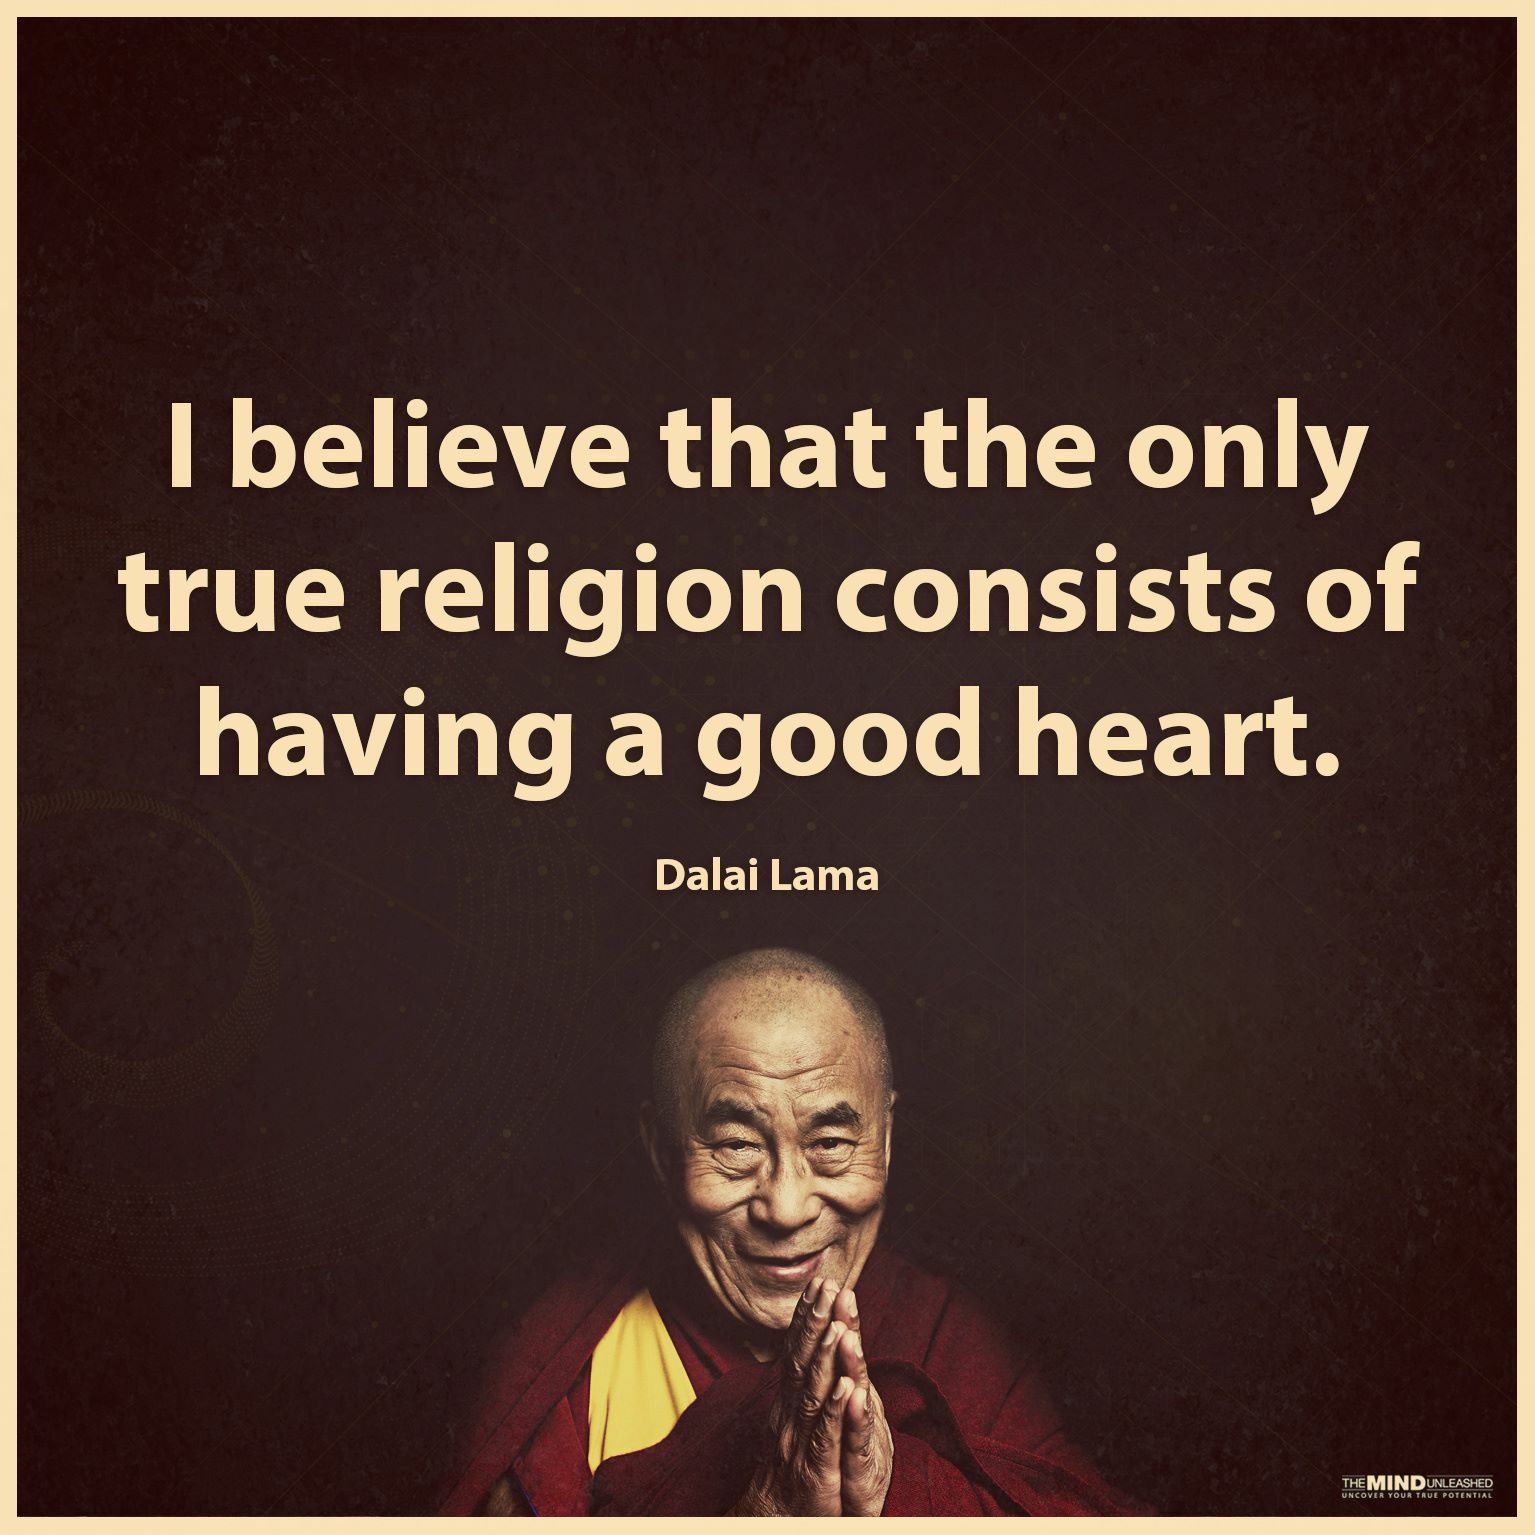 Read Complete 135 Best Religion Quotes And Sayings To Explore And Share